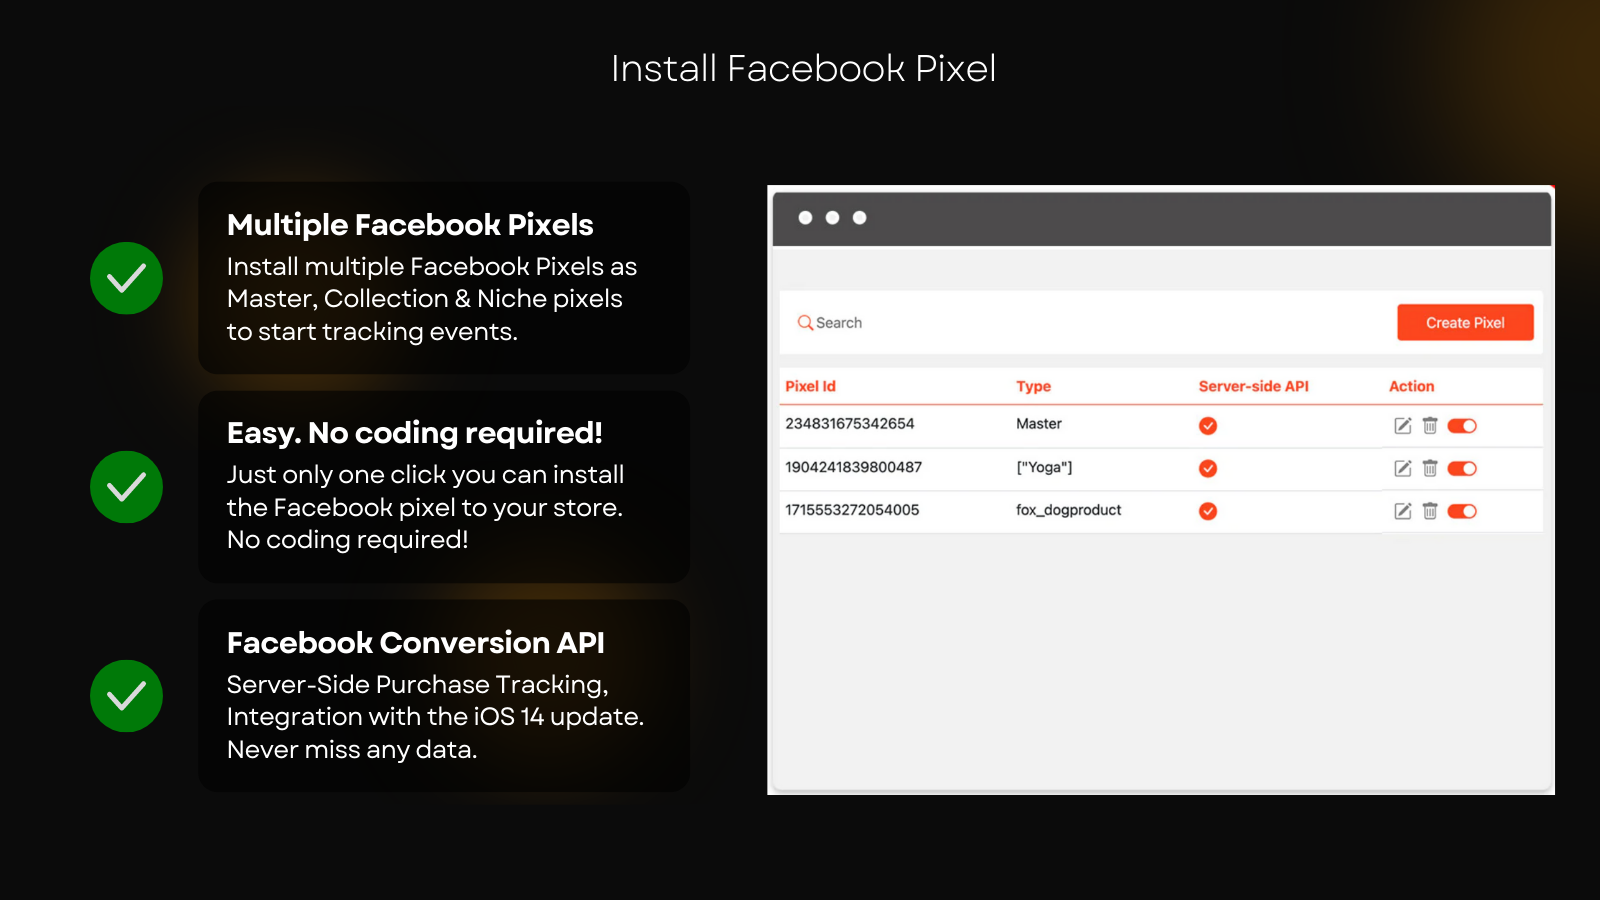 Install multiple Facebook pixels and Conversion APIs